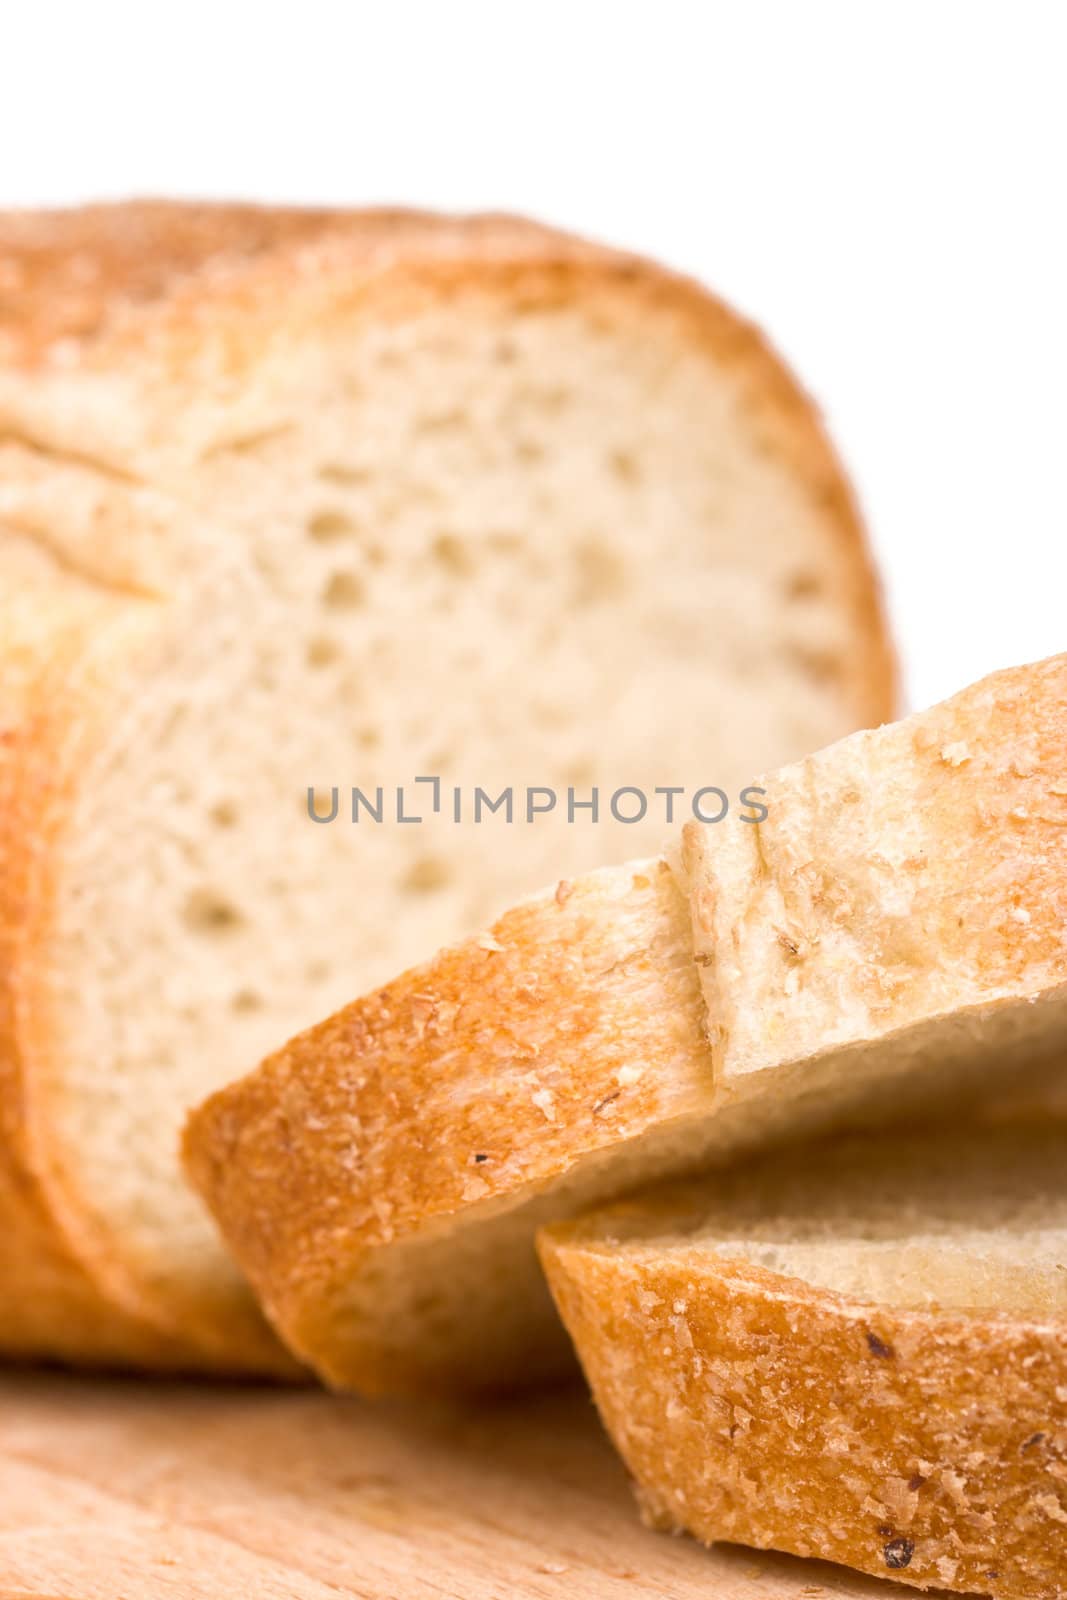 Sliced bread on wooden plate by dimol